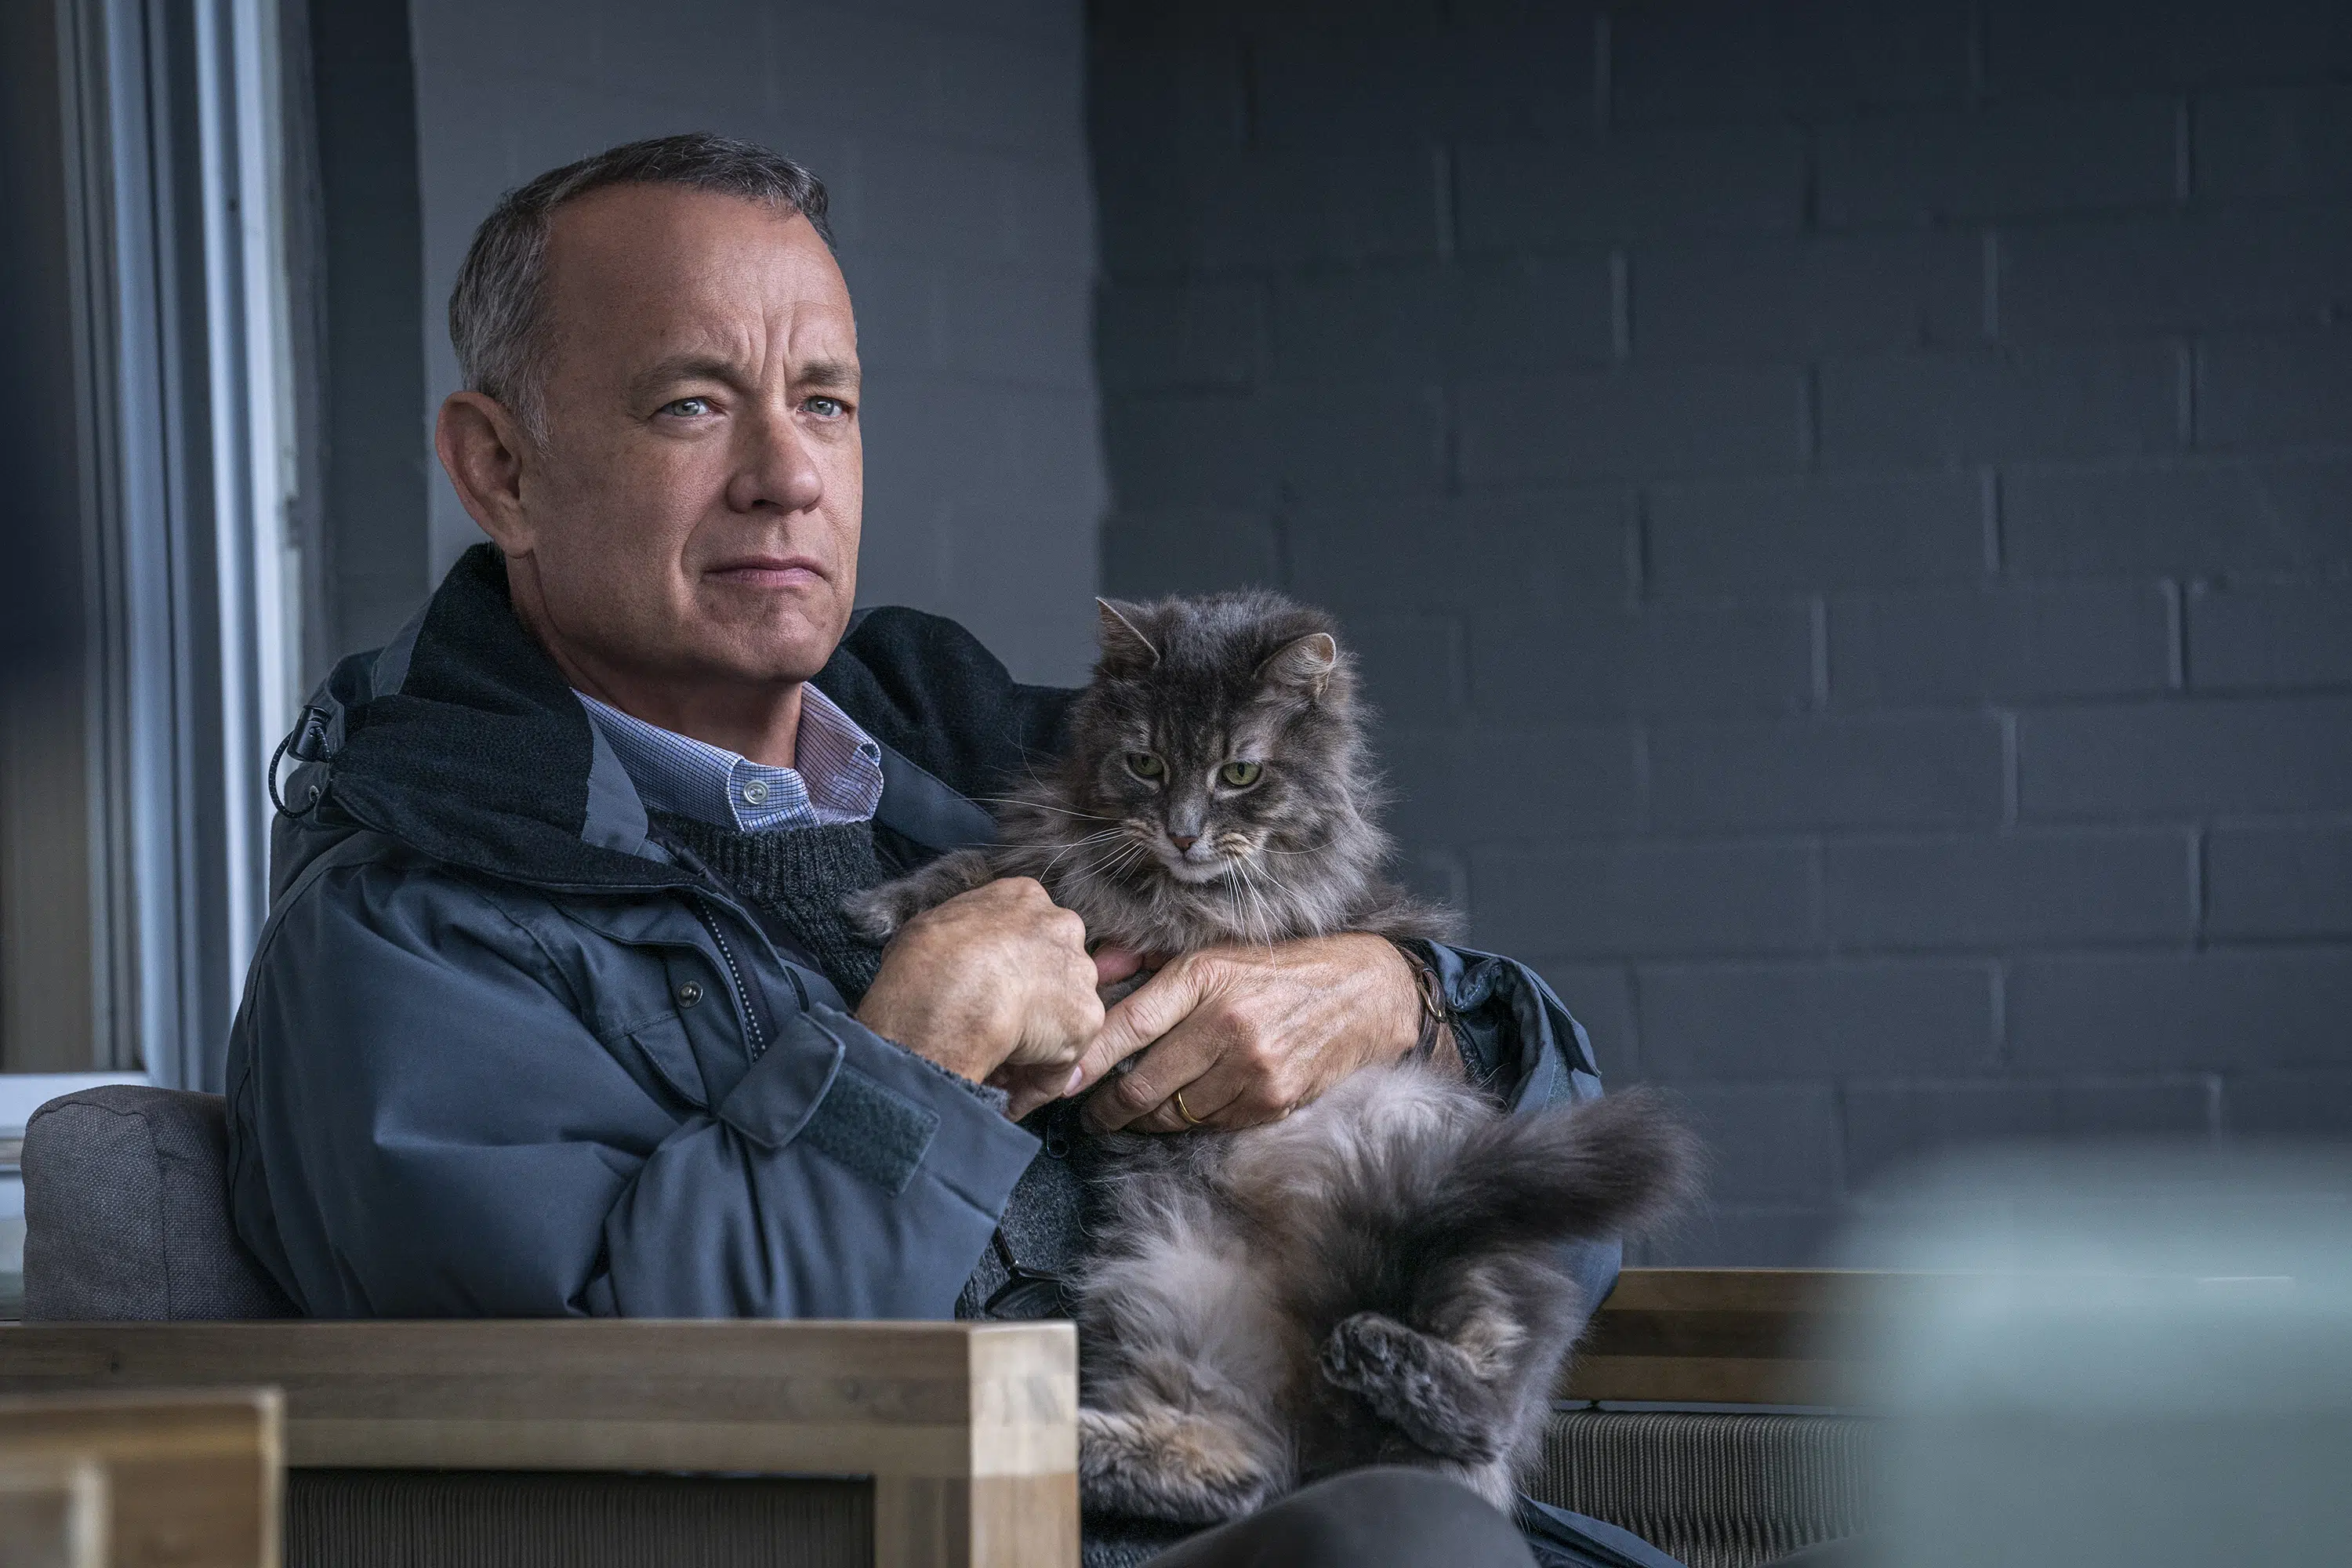 Review: A grumpy Tom Hanks stars in ‘A Man Called Otto’